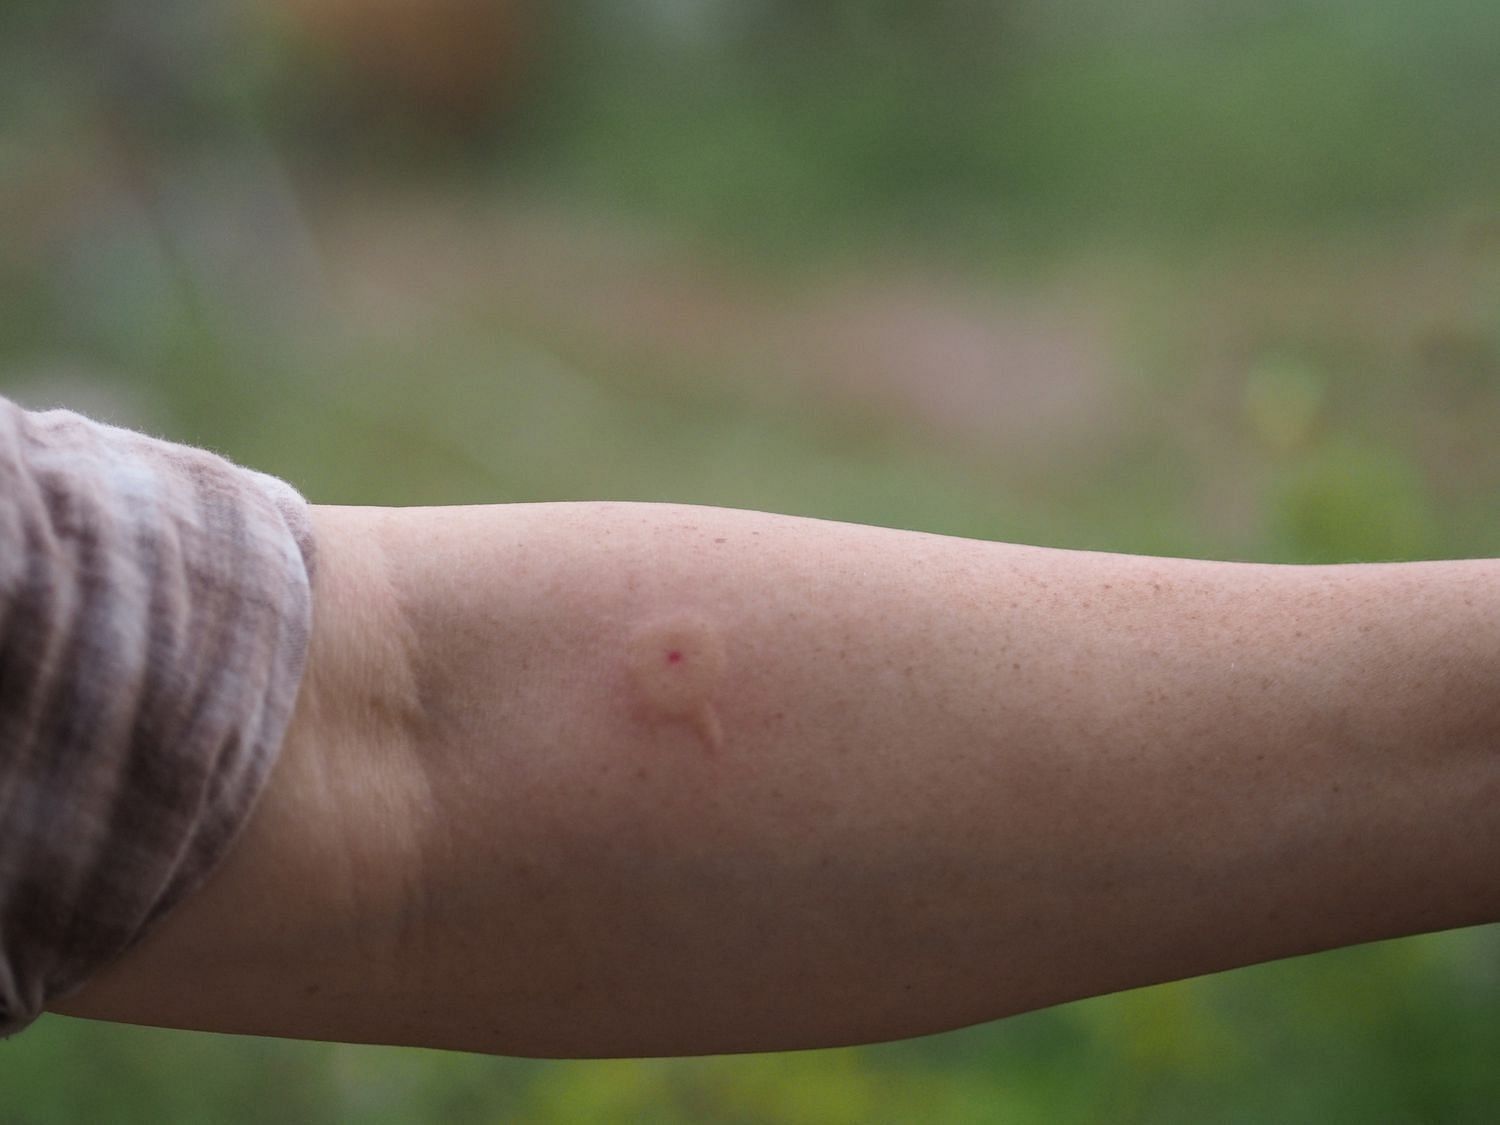 Wasp-sting (Image via Getty Images)